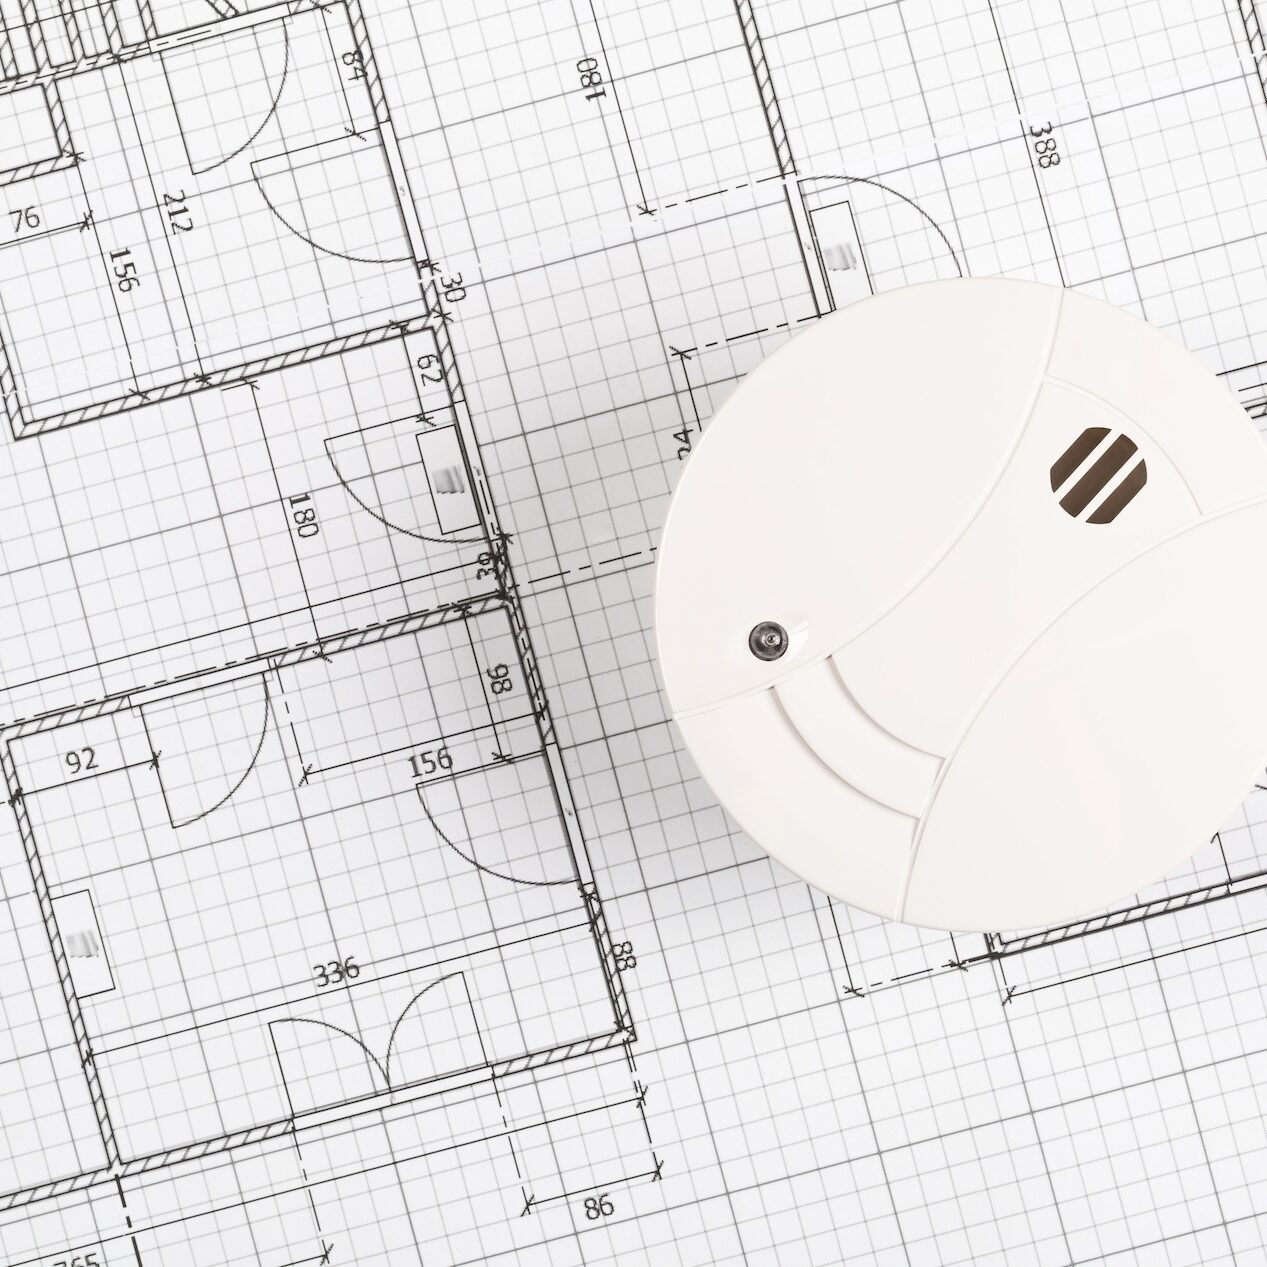 Smoke detector or fire alarm sensor on white architectural plans background, house safety or security concept, copy space, top view flat lay from above